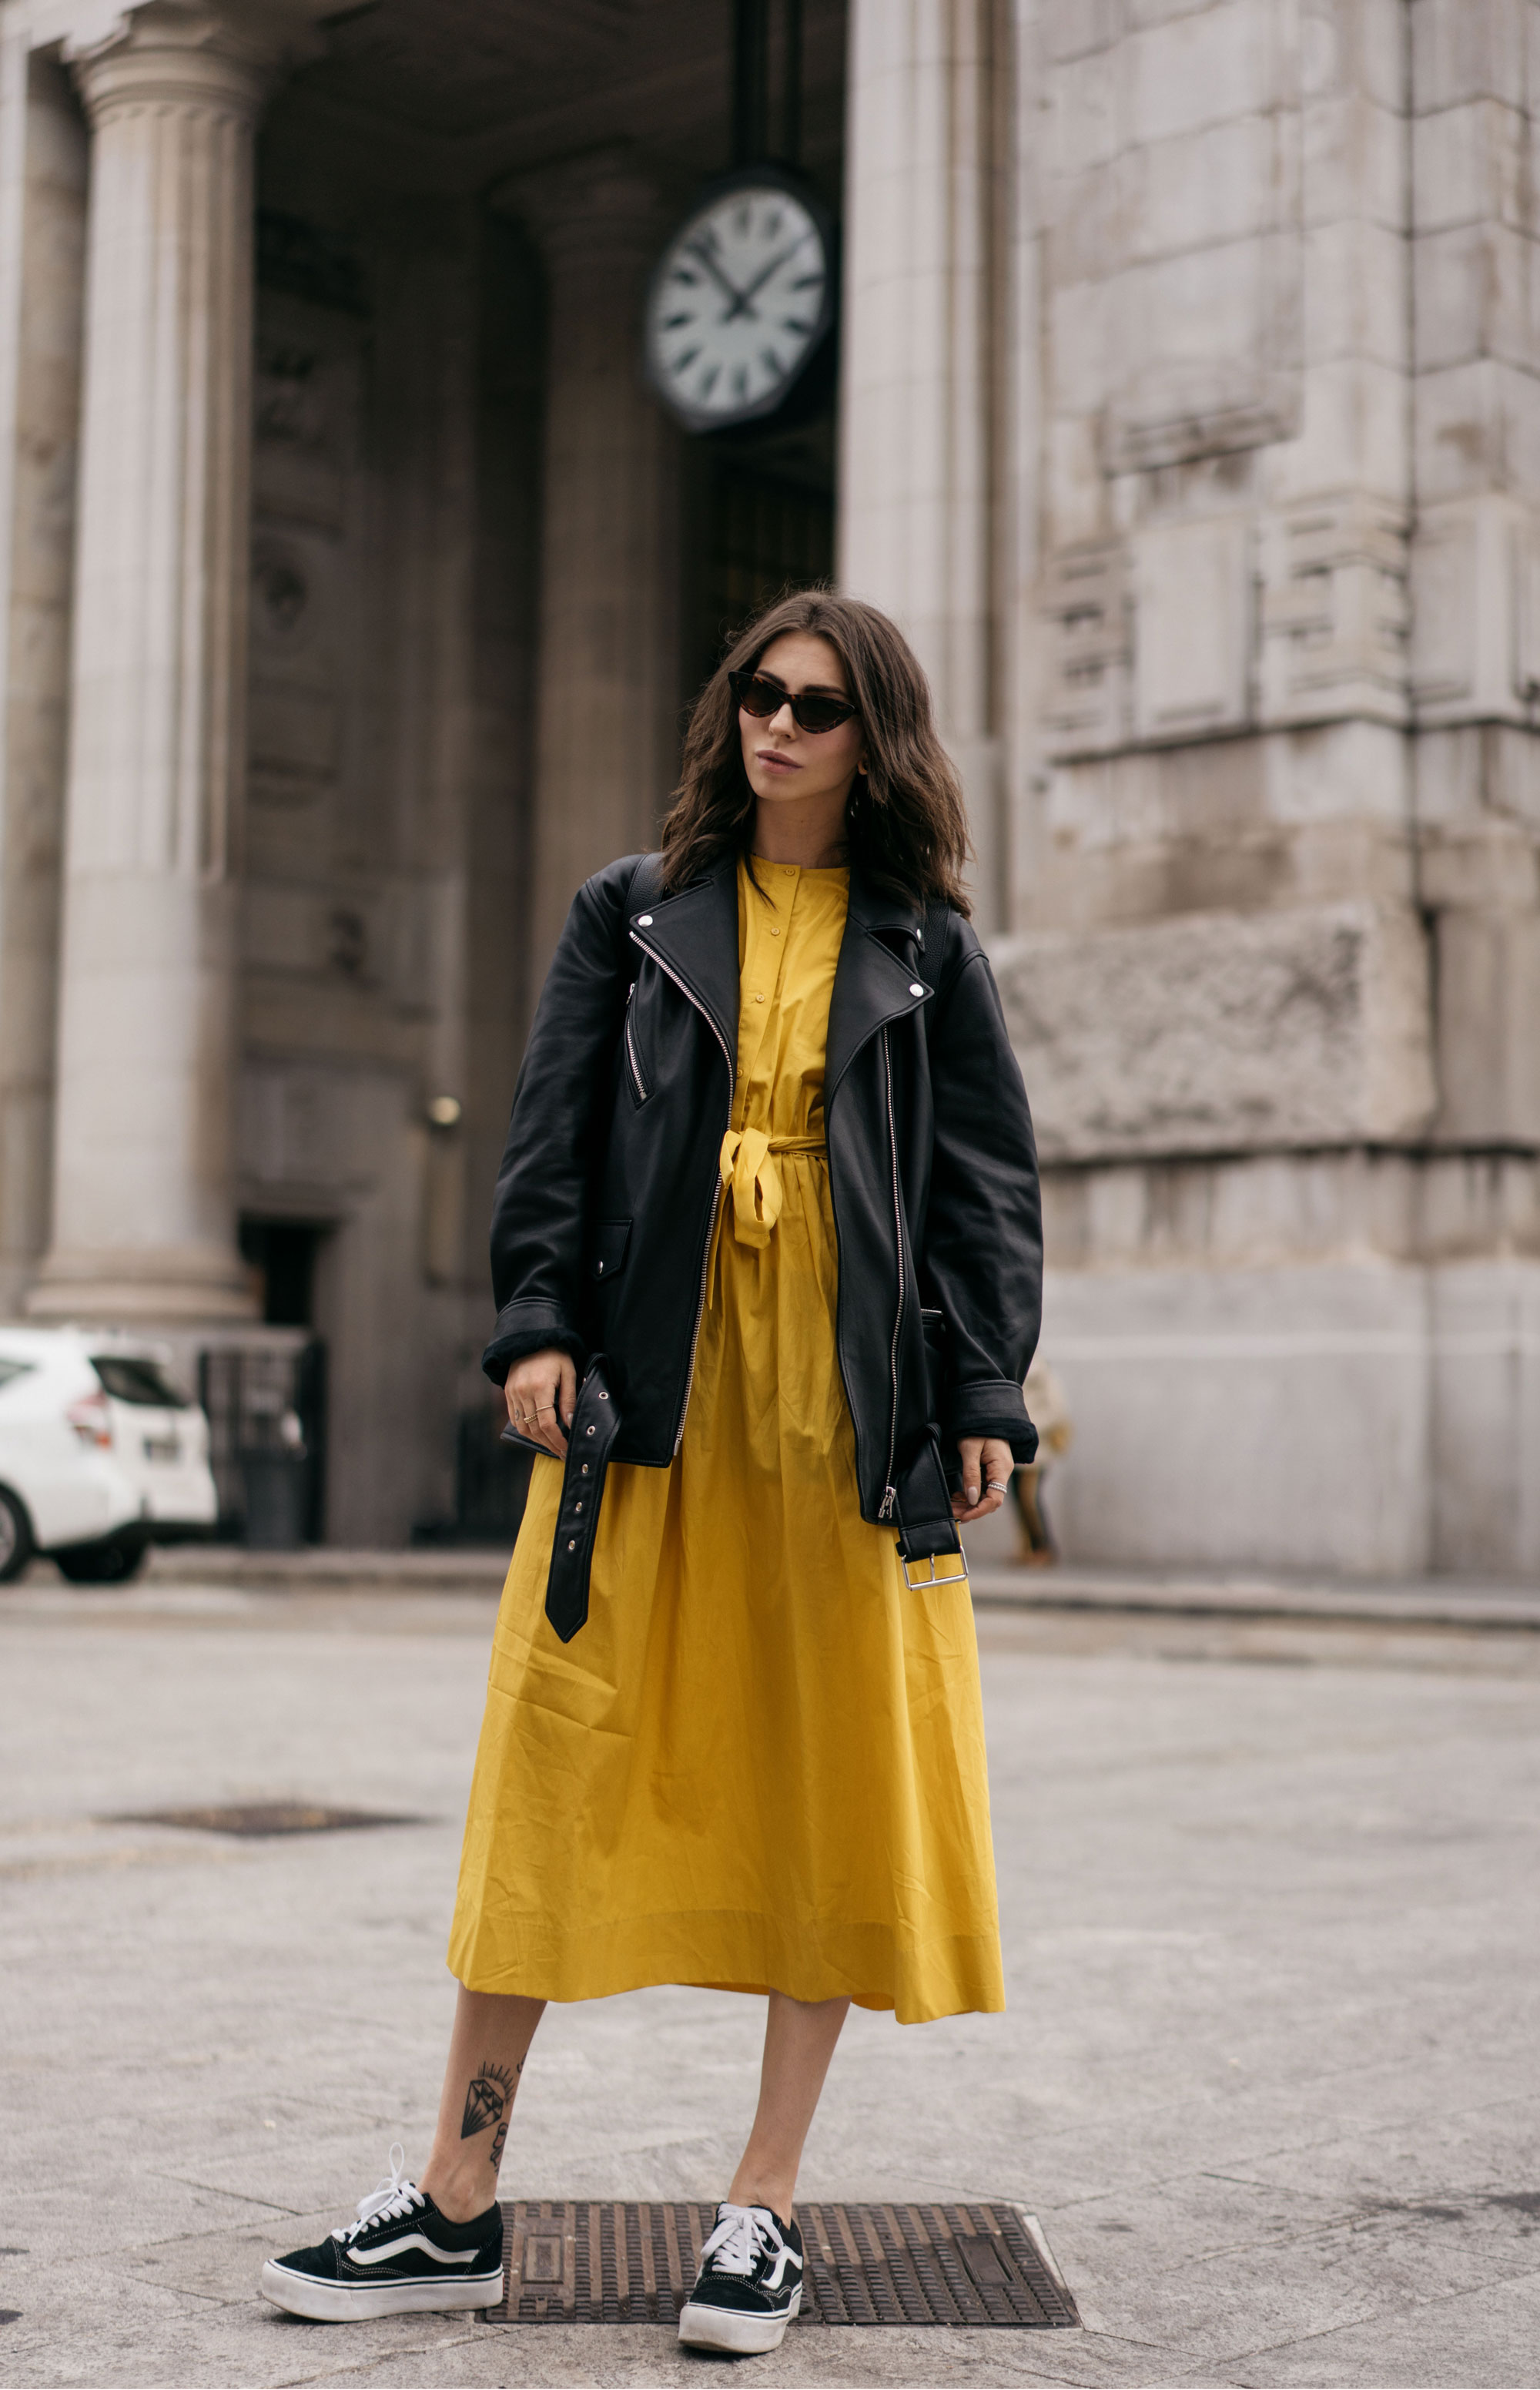 outfit | yellow | street style | business | party | casual | summer | dress | how to wear | all shades of yellow | editorial shooting | fashion | inspiration